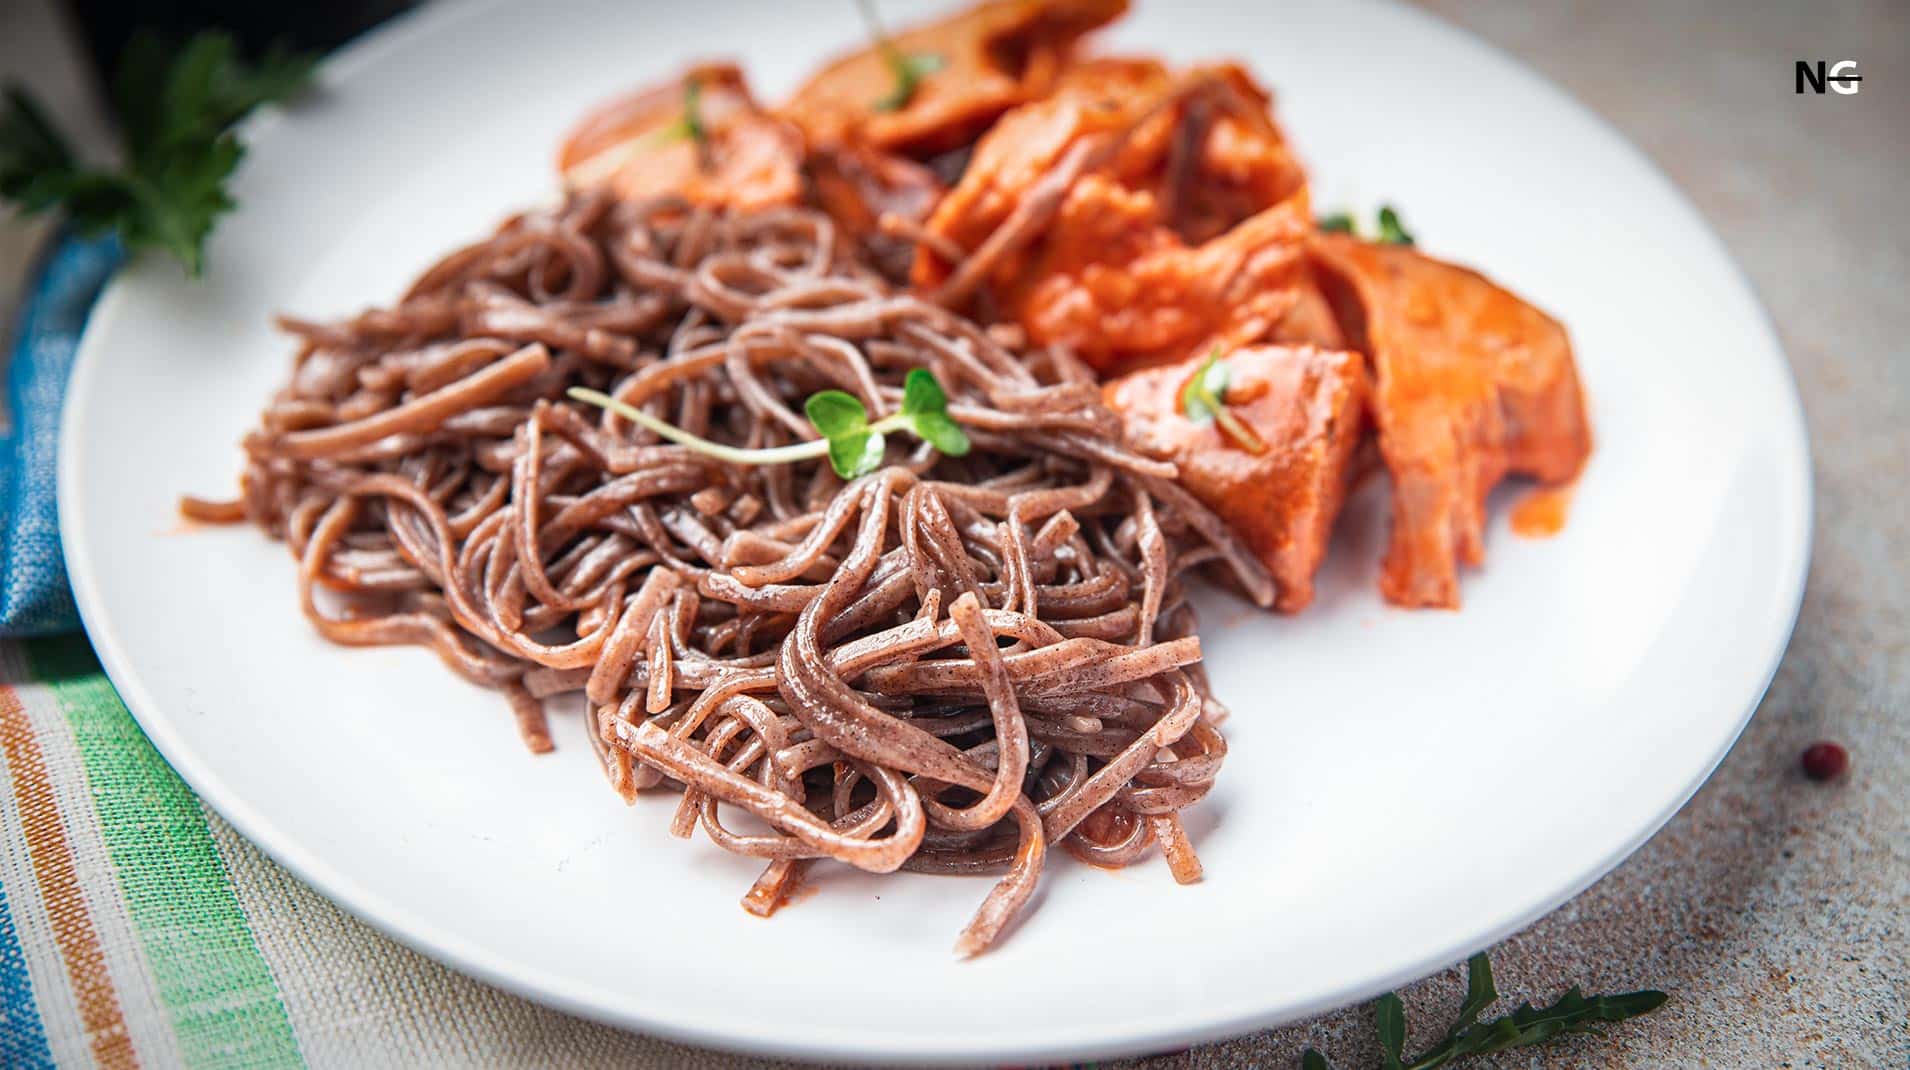 Find Out Whether The Soba Noodles You Picked Contains Gluten Or Not